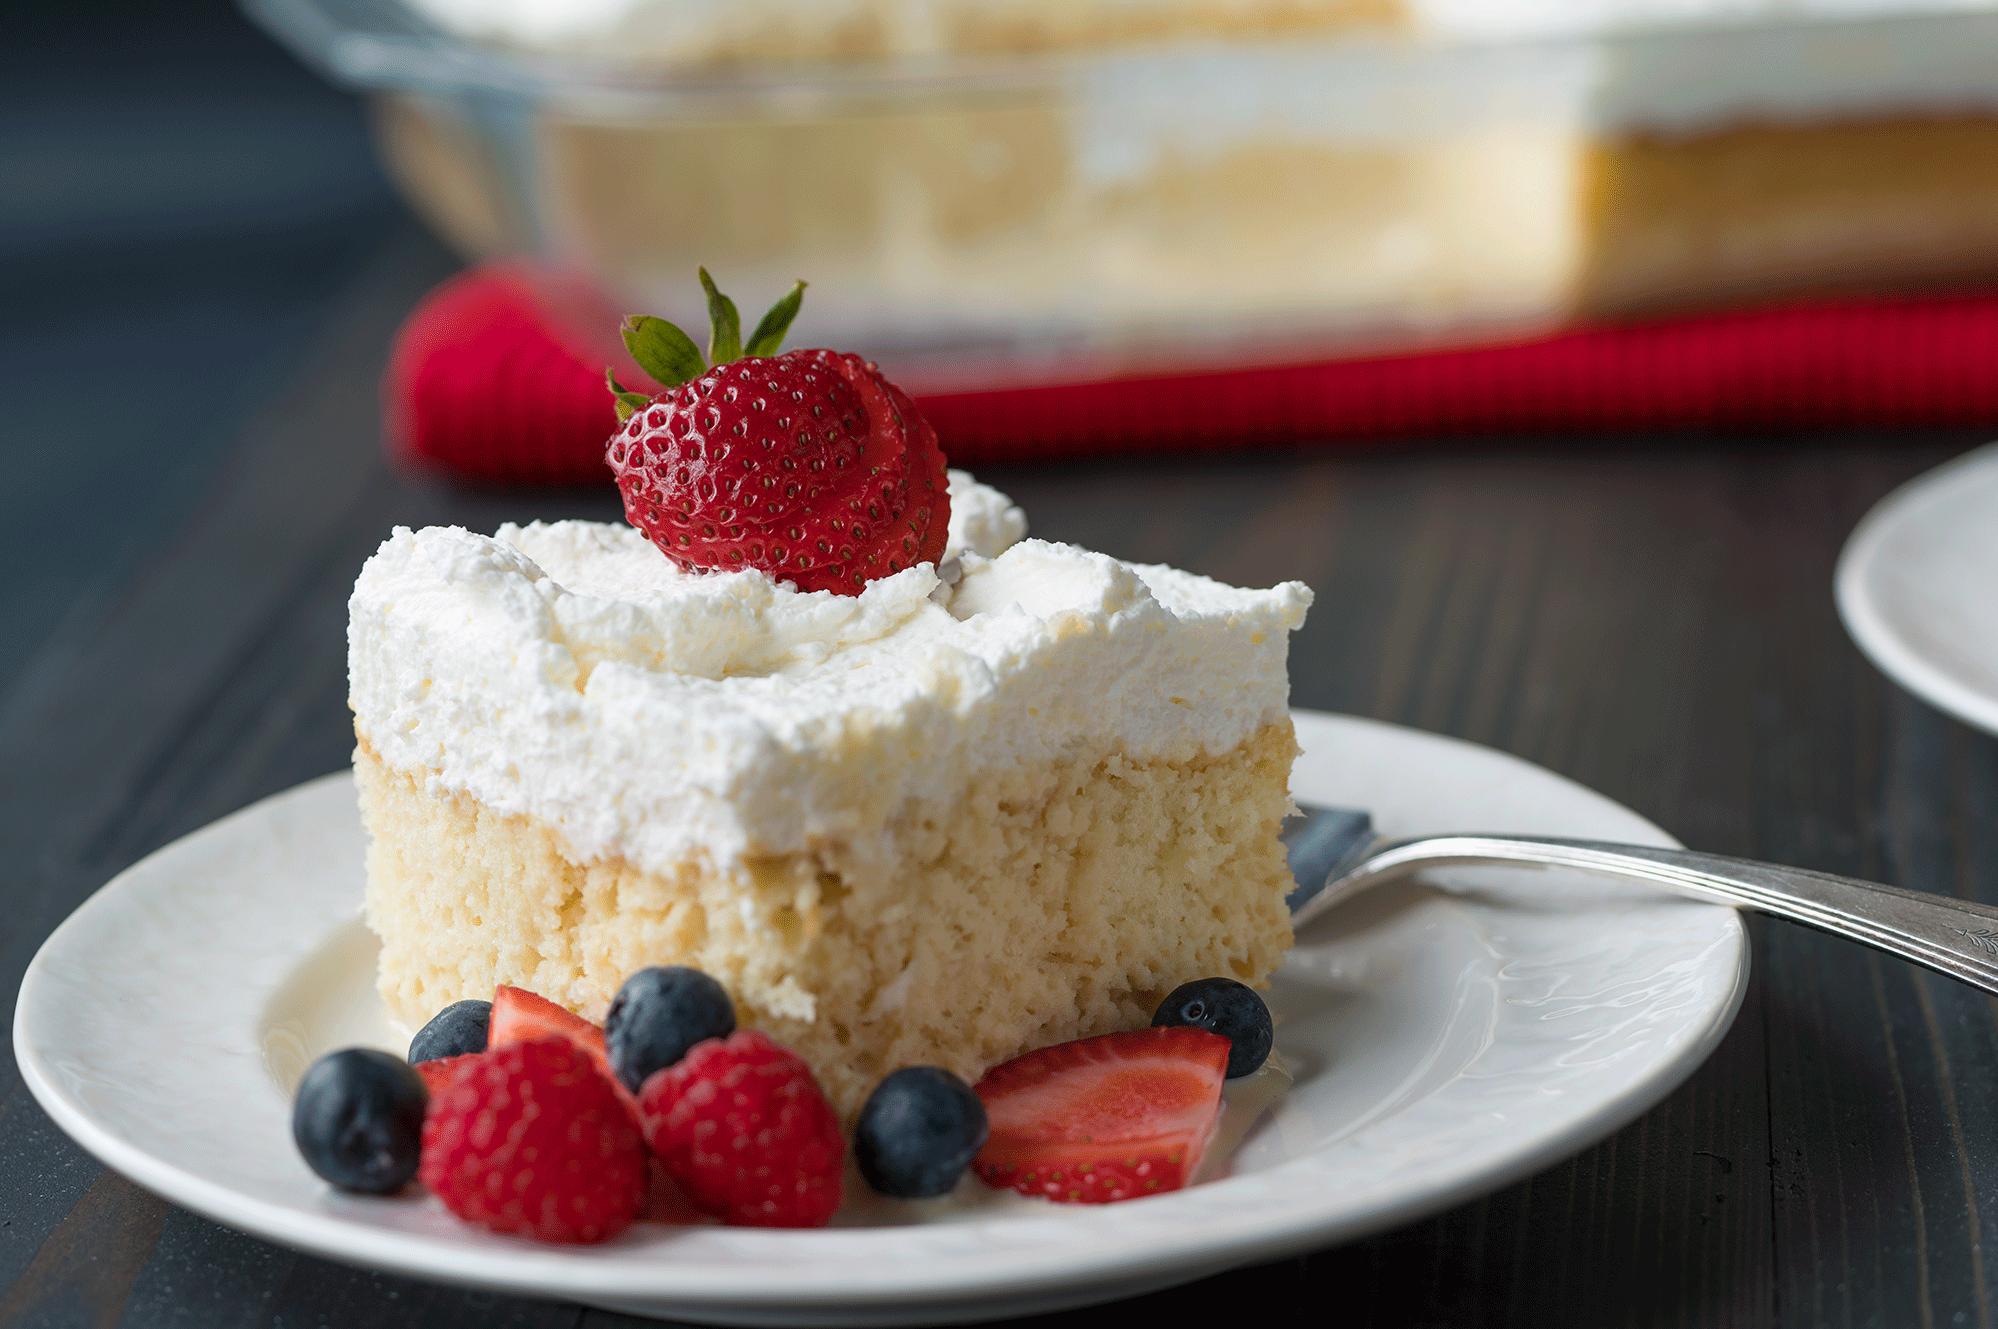  A crowd-pleaser classic that never gets old: tres leches cake